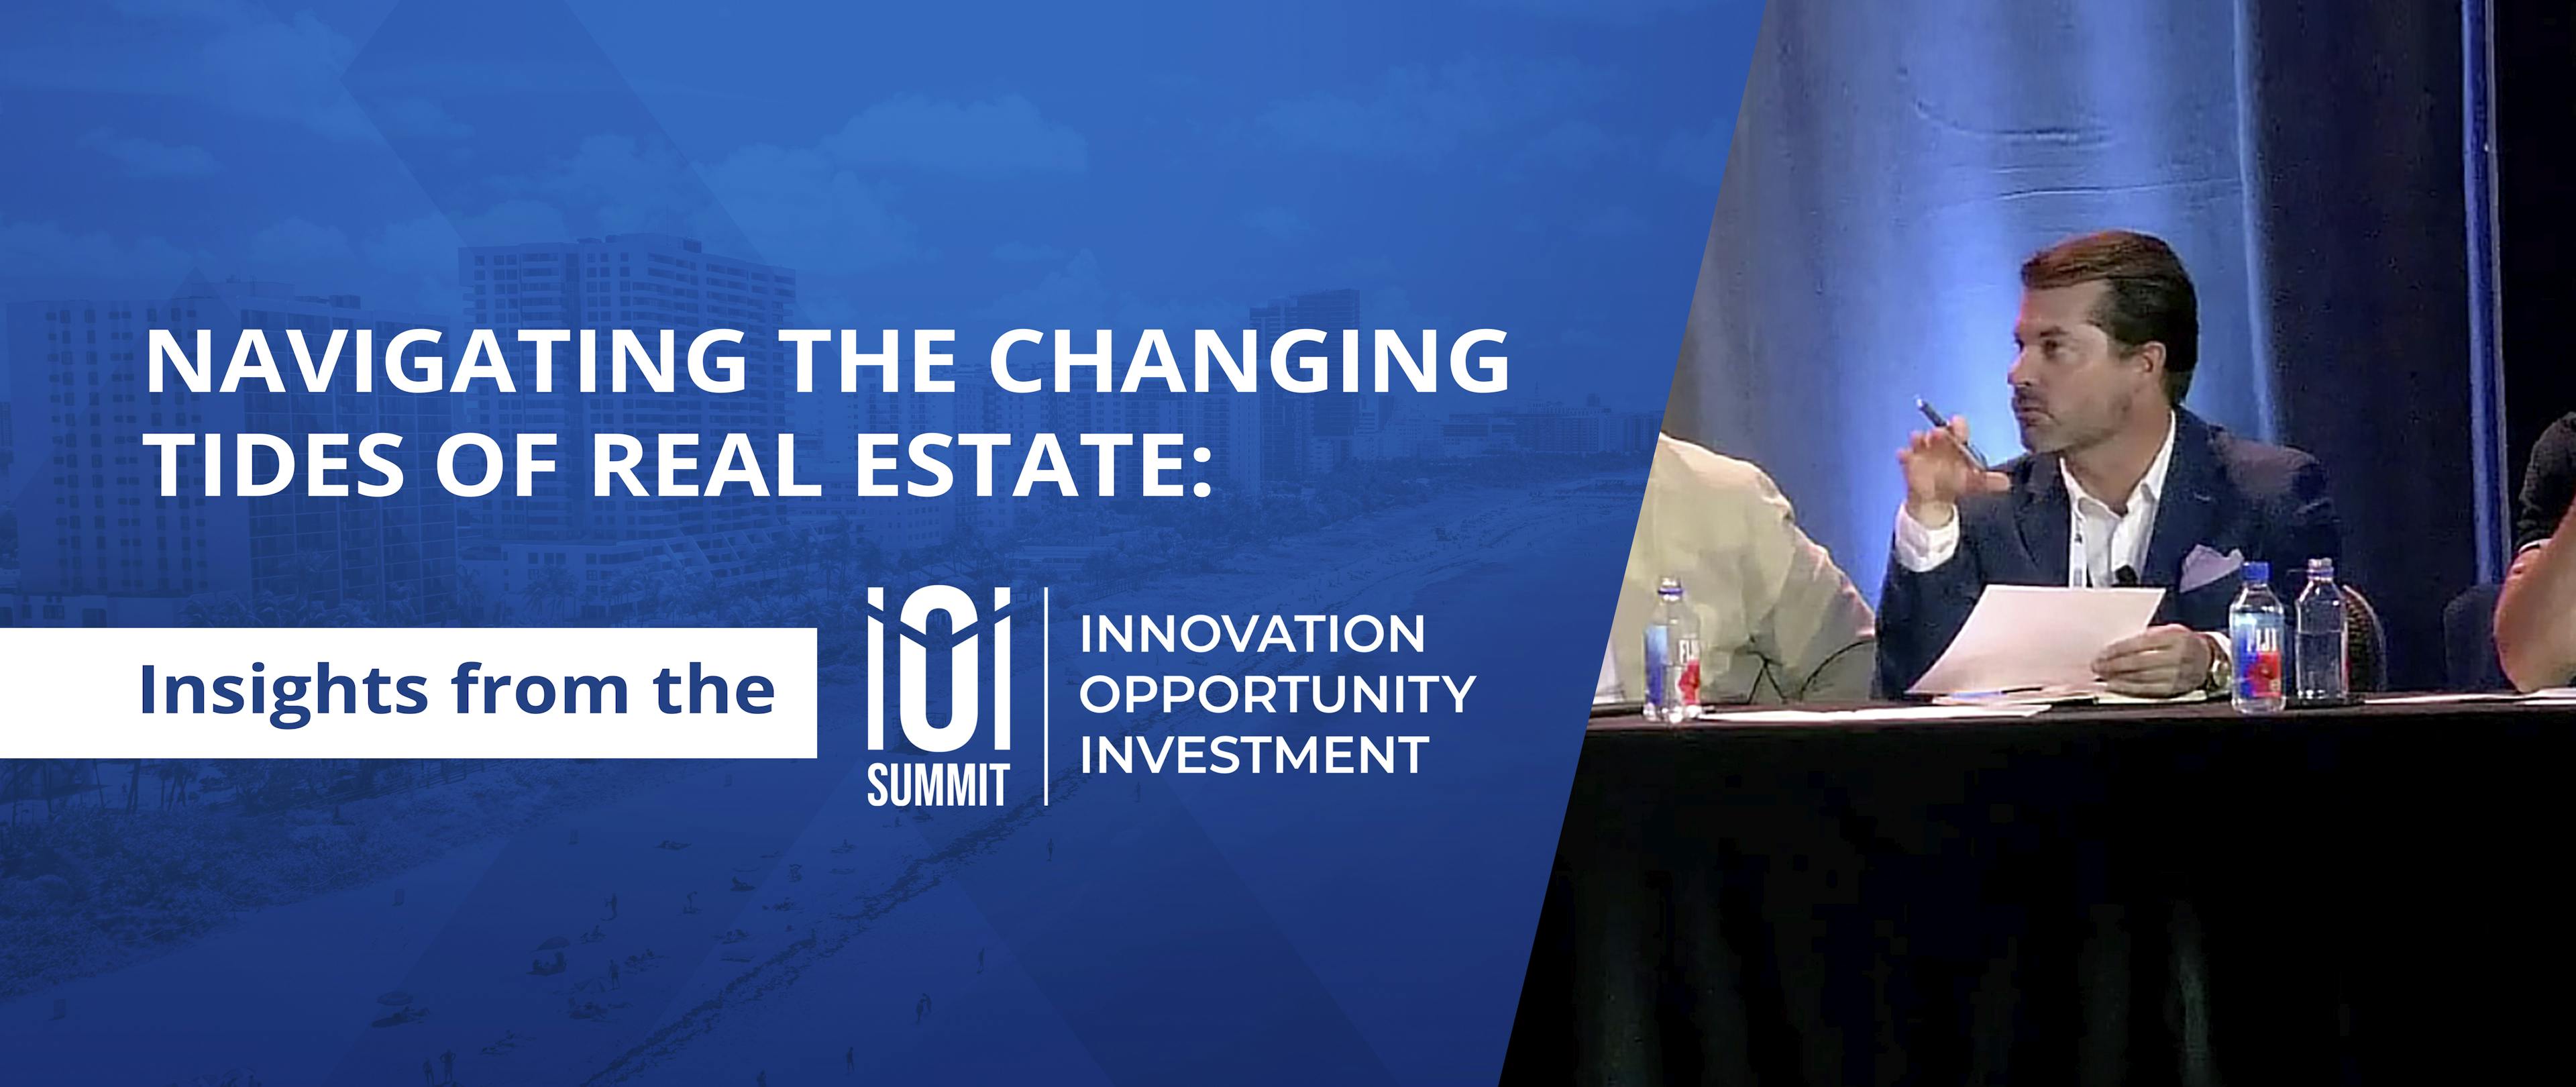 Navigating the Changing Tides of Real Estate: Insights from the 2023 iOi Summit0